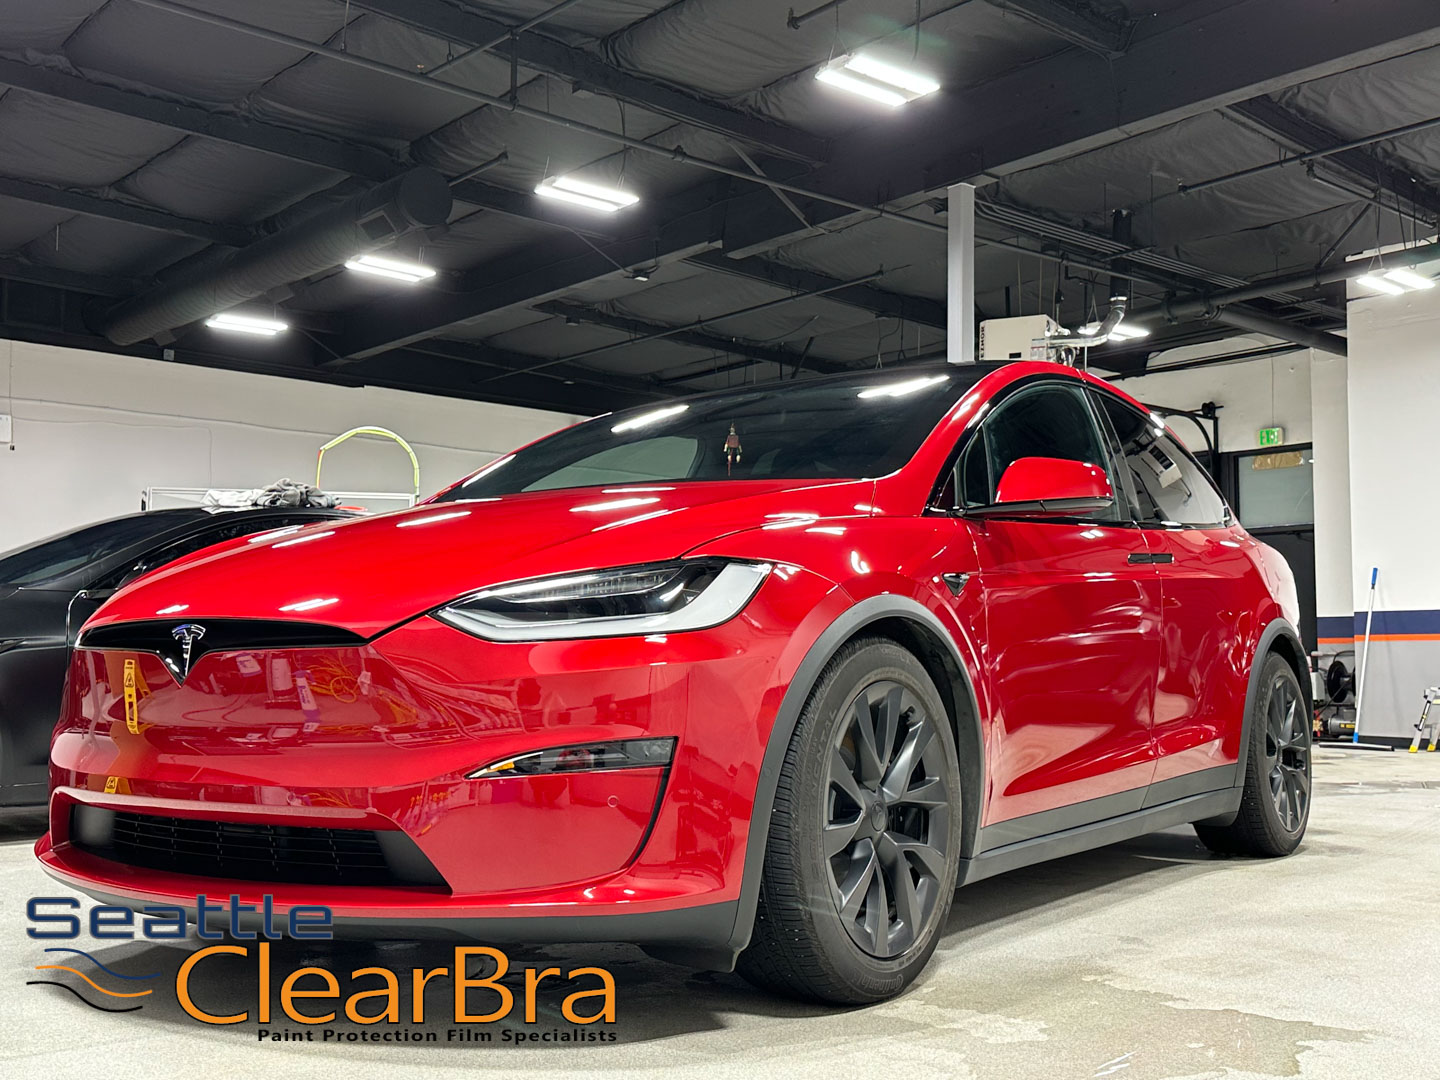 seattle-clearbra-tesla-model-x-xpel-ultimate-fusion-redmond-clear-bra-ppf-paint-protection-fil...jpg